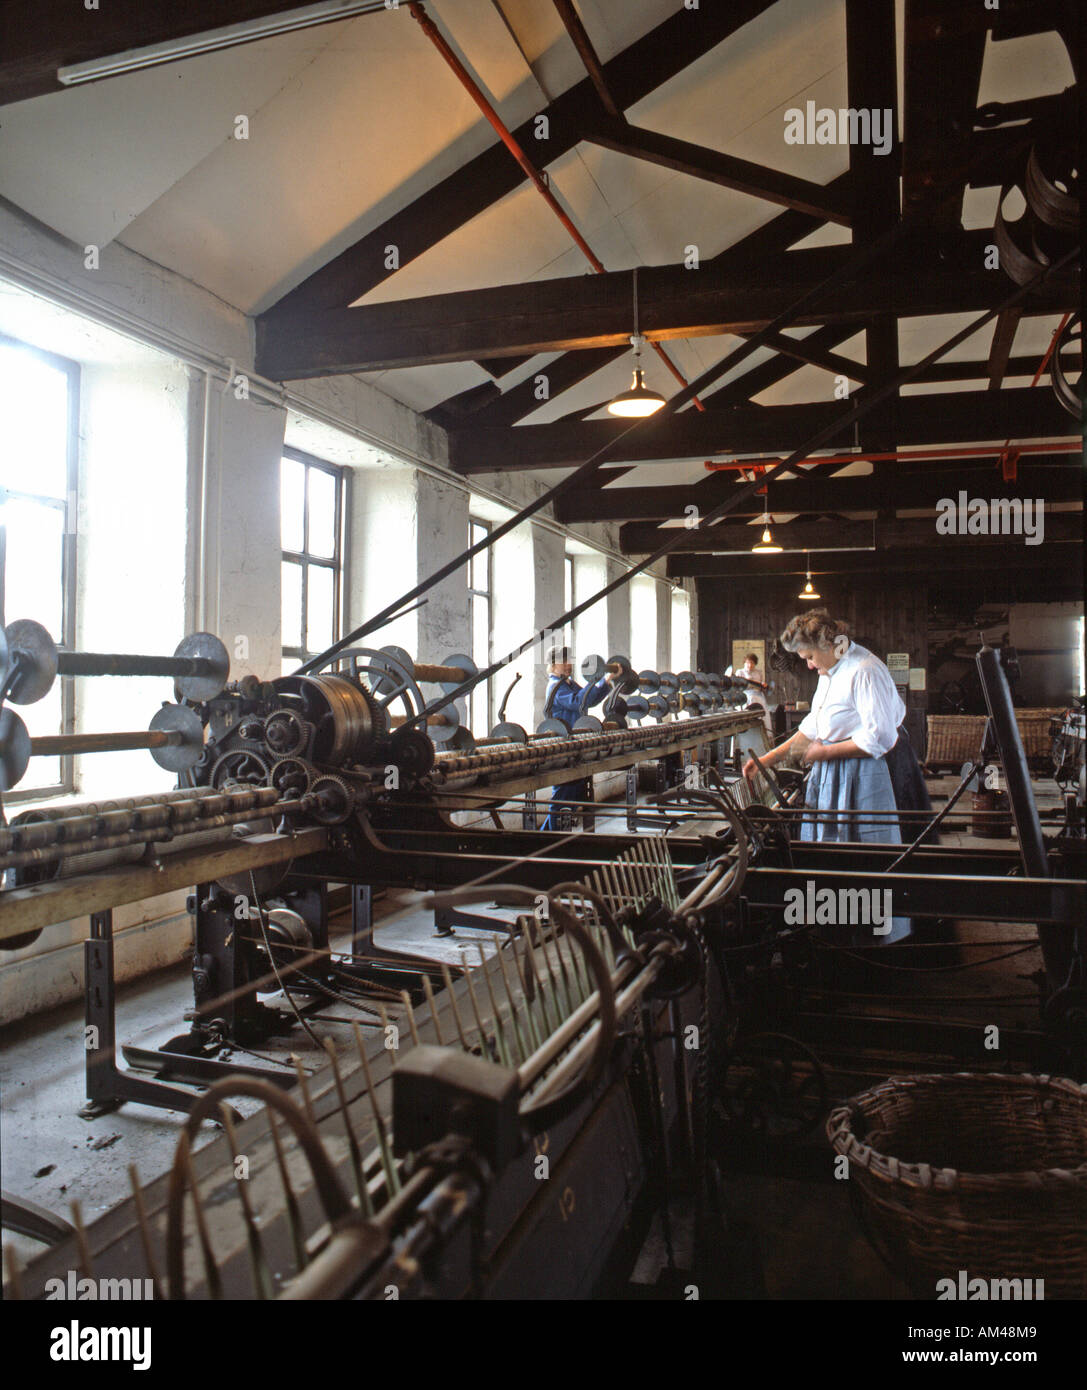 Weaving machines built during the Industrial Revolution, on display and working at Armley Mills, Leeds Industrial Museum. Stock Photo